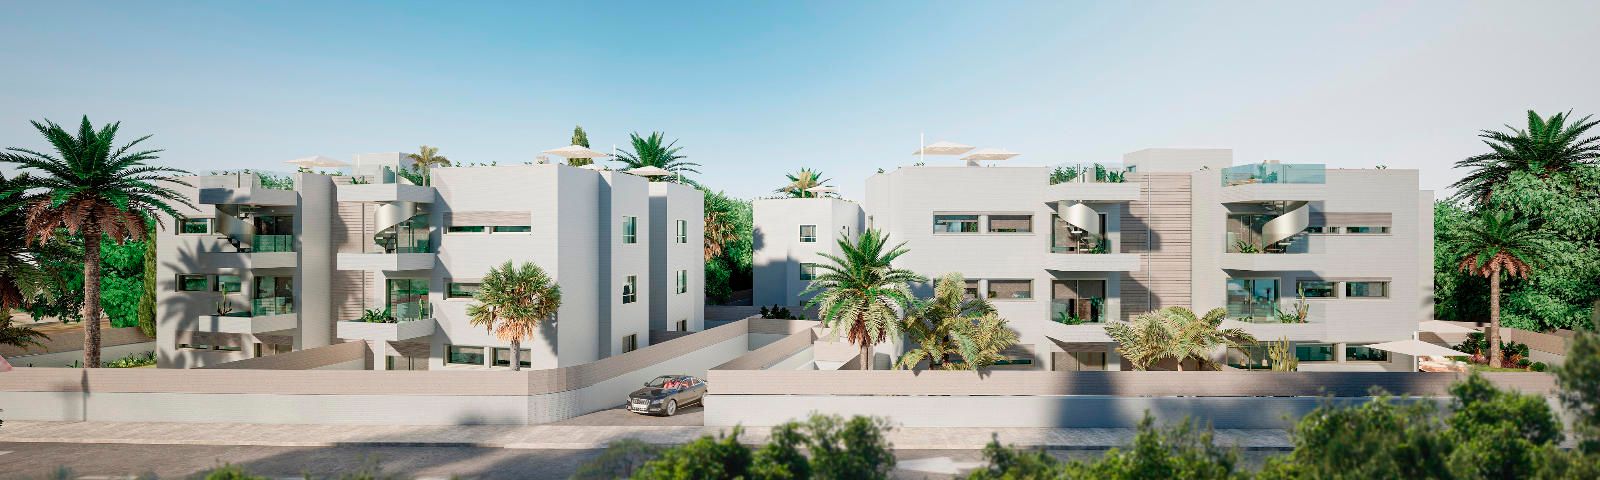 Apartment for sale in Ibiza 9